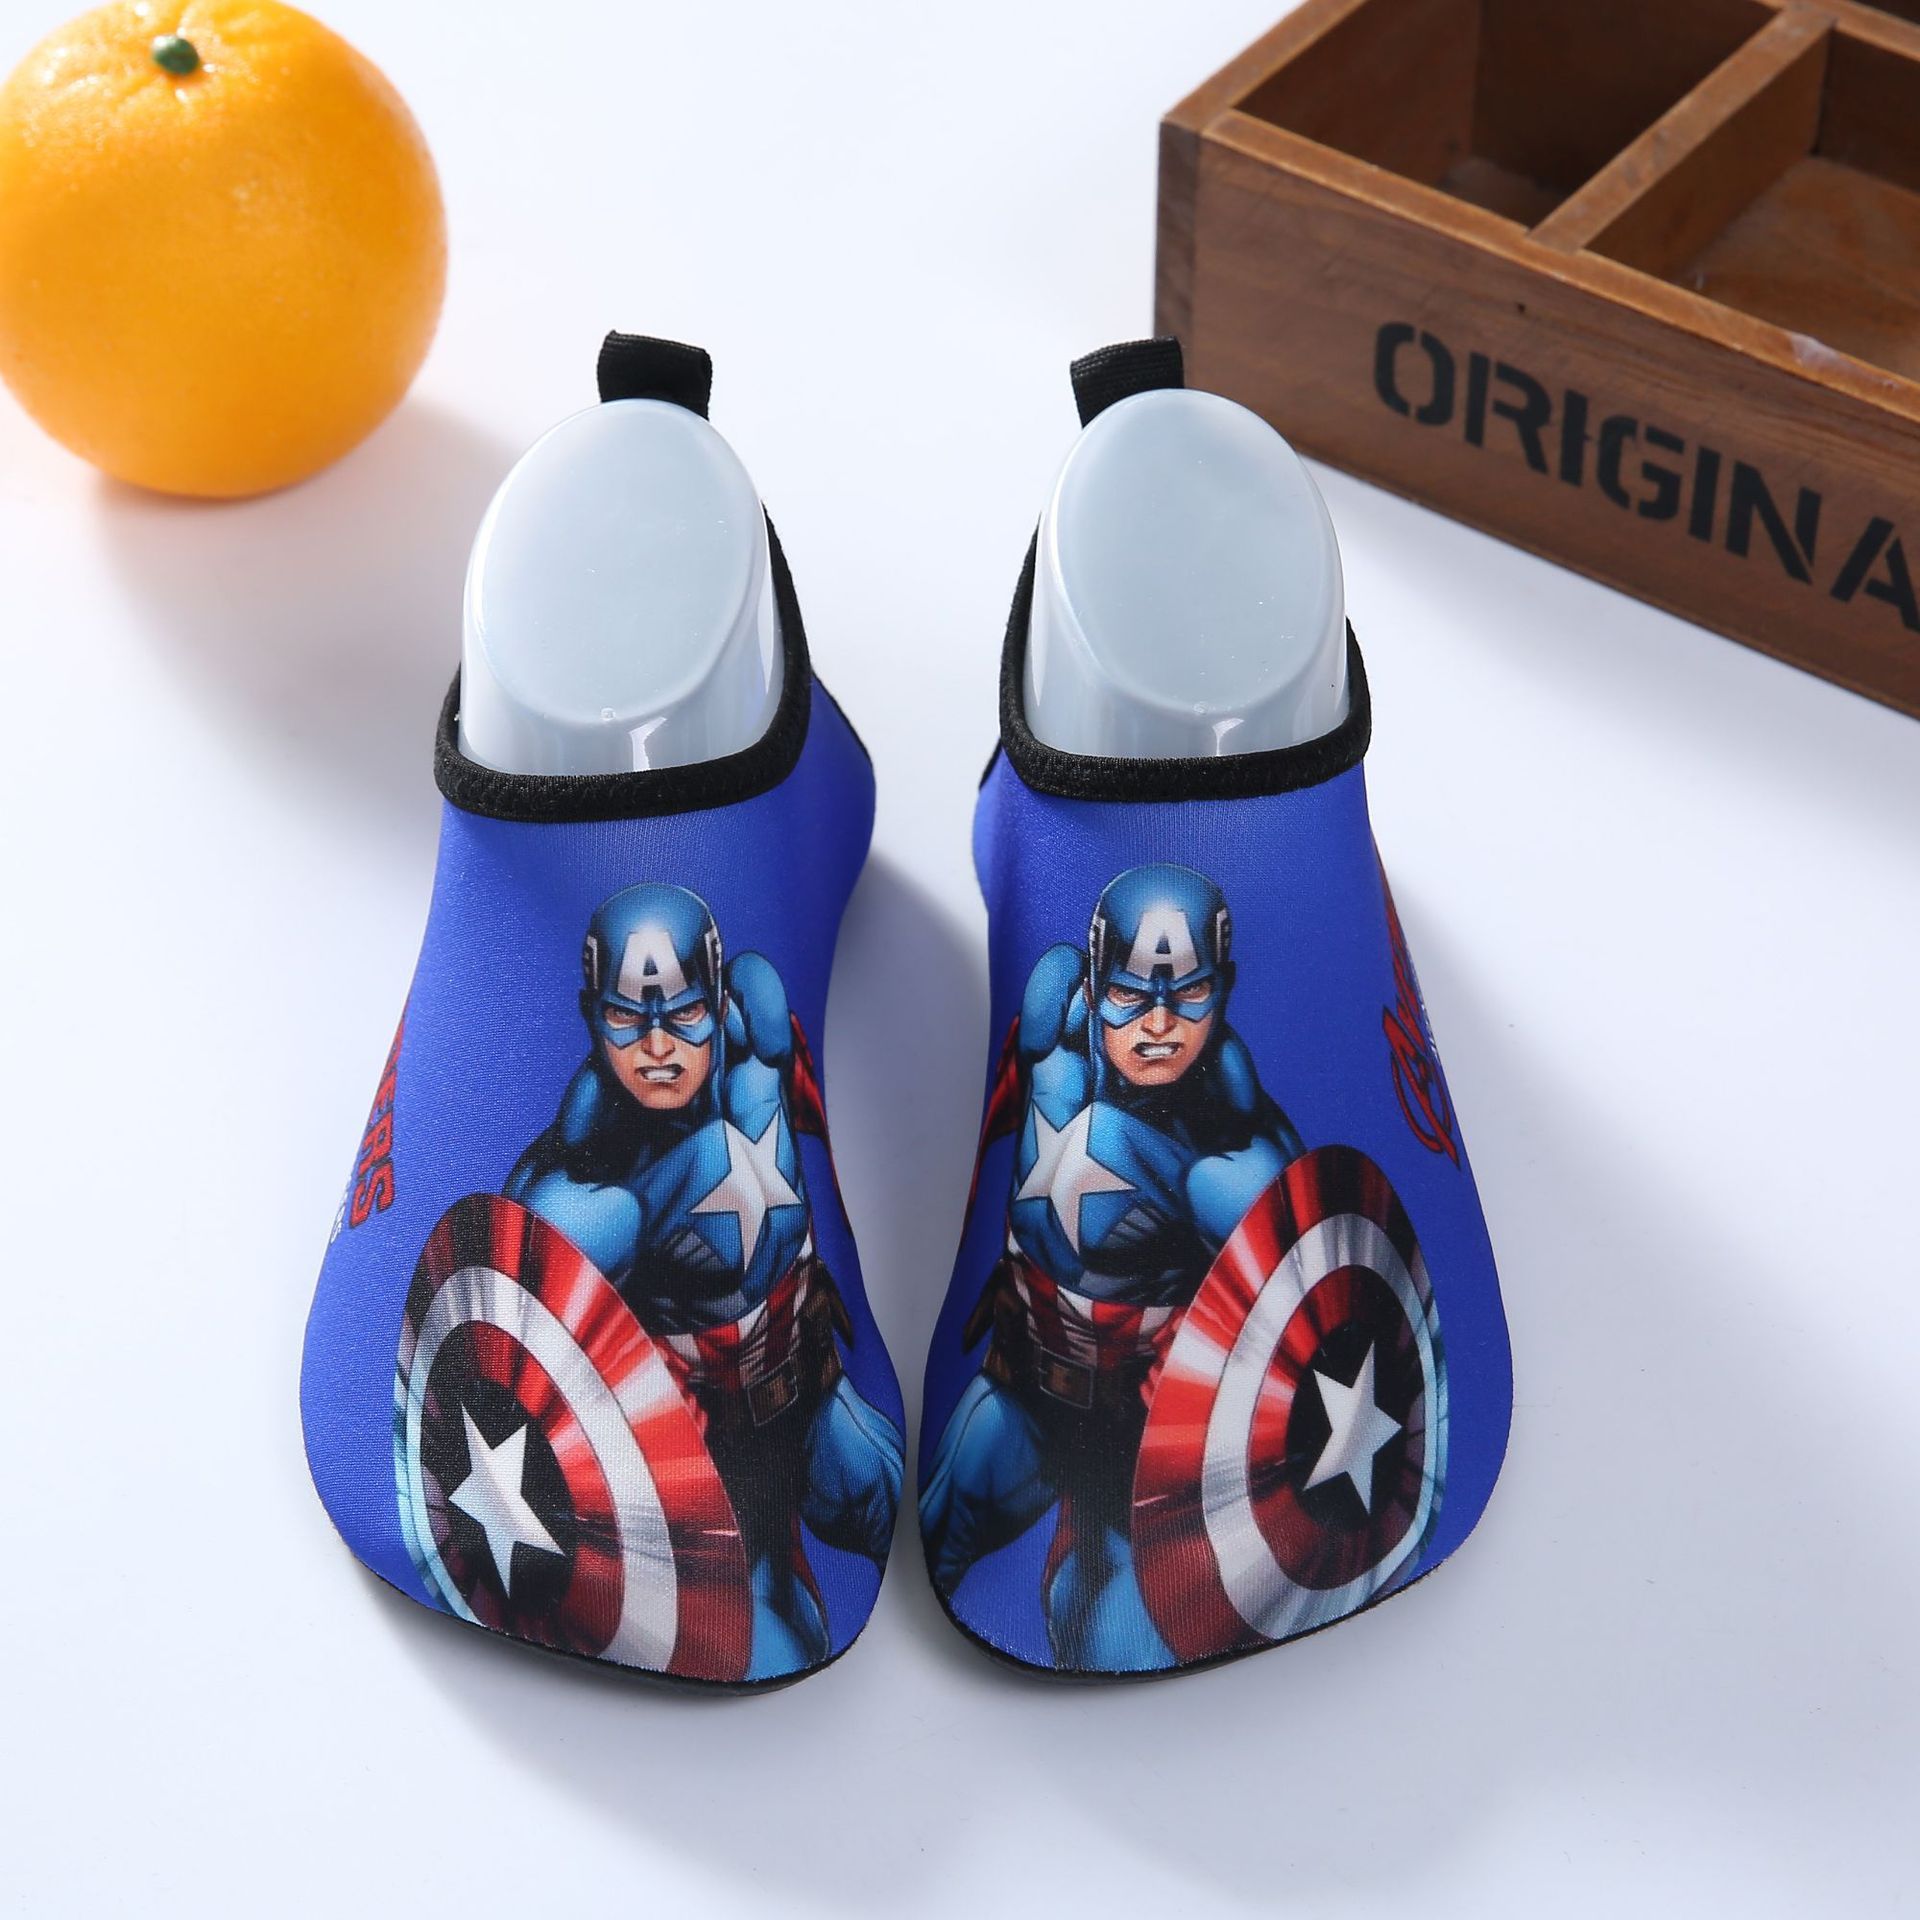 Children's floor shoes, beach casual shoes, snorkeling shoes, skin-fitting cartoon river shoes, blue Captain America